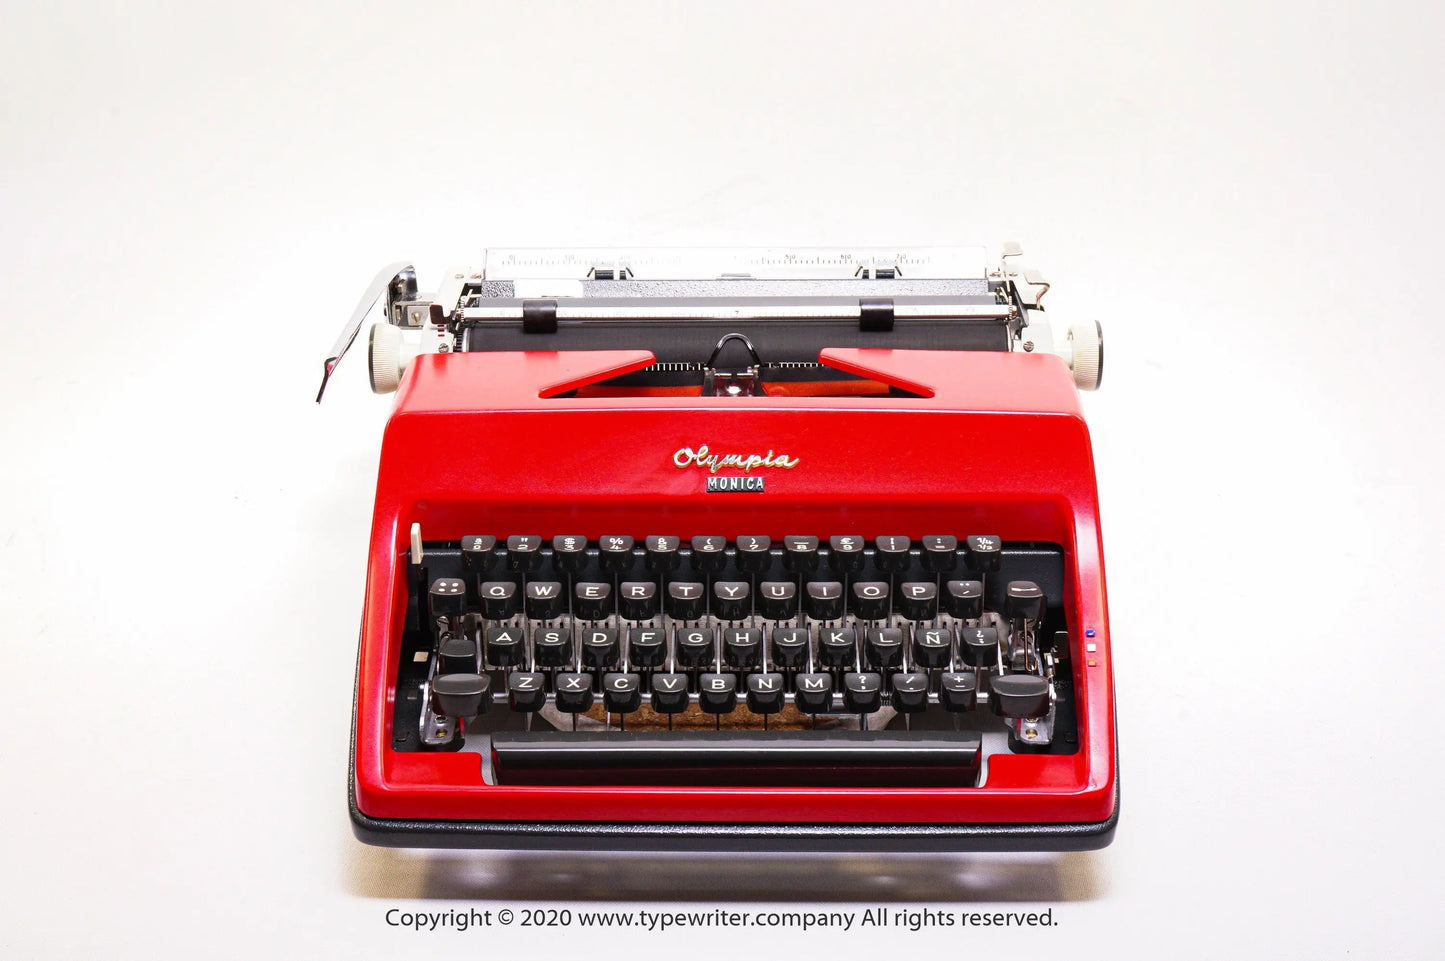 SALE! - Olympia SM Monica Red Typewriter, Vintage, Mint Condition, Professionally Serviced - ElGranero Typewriter.Company